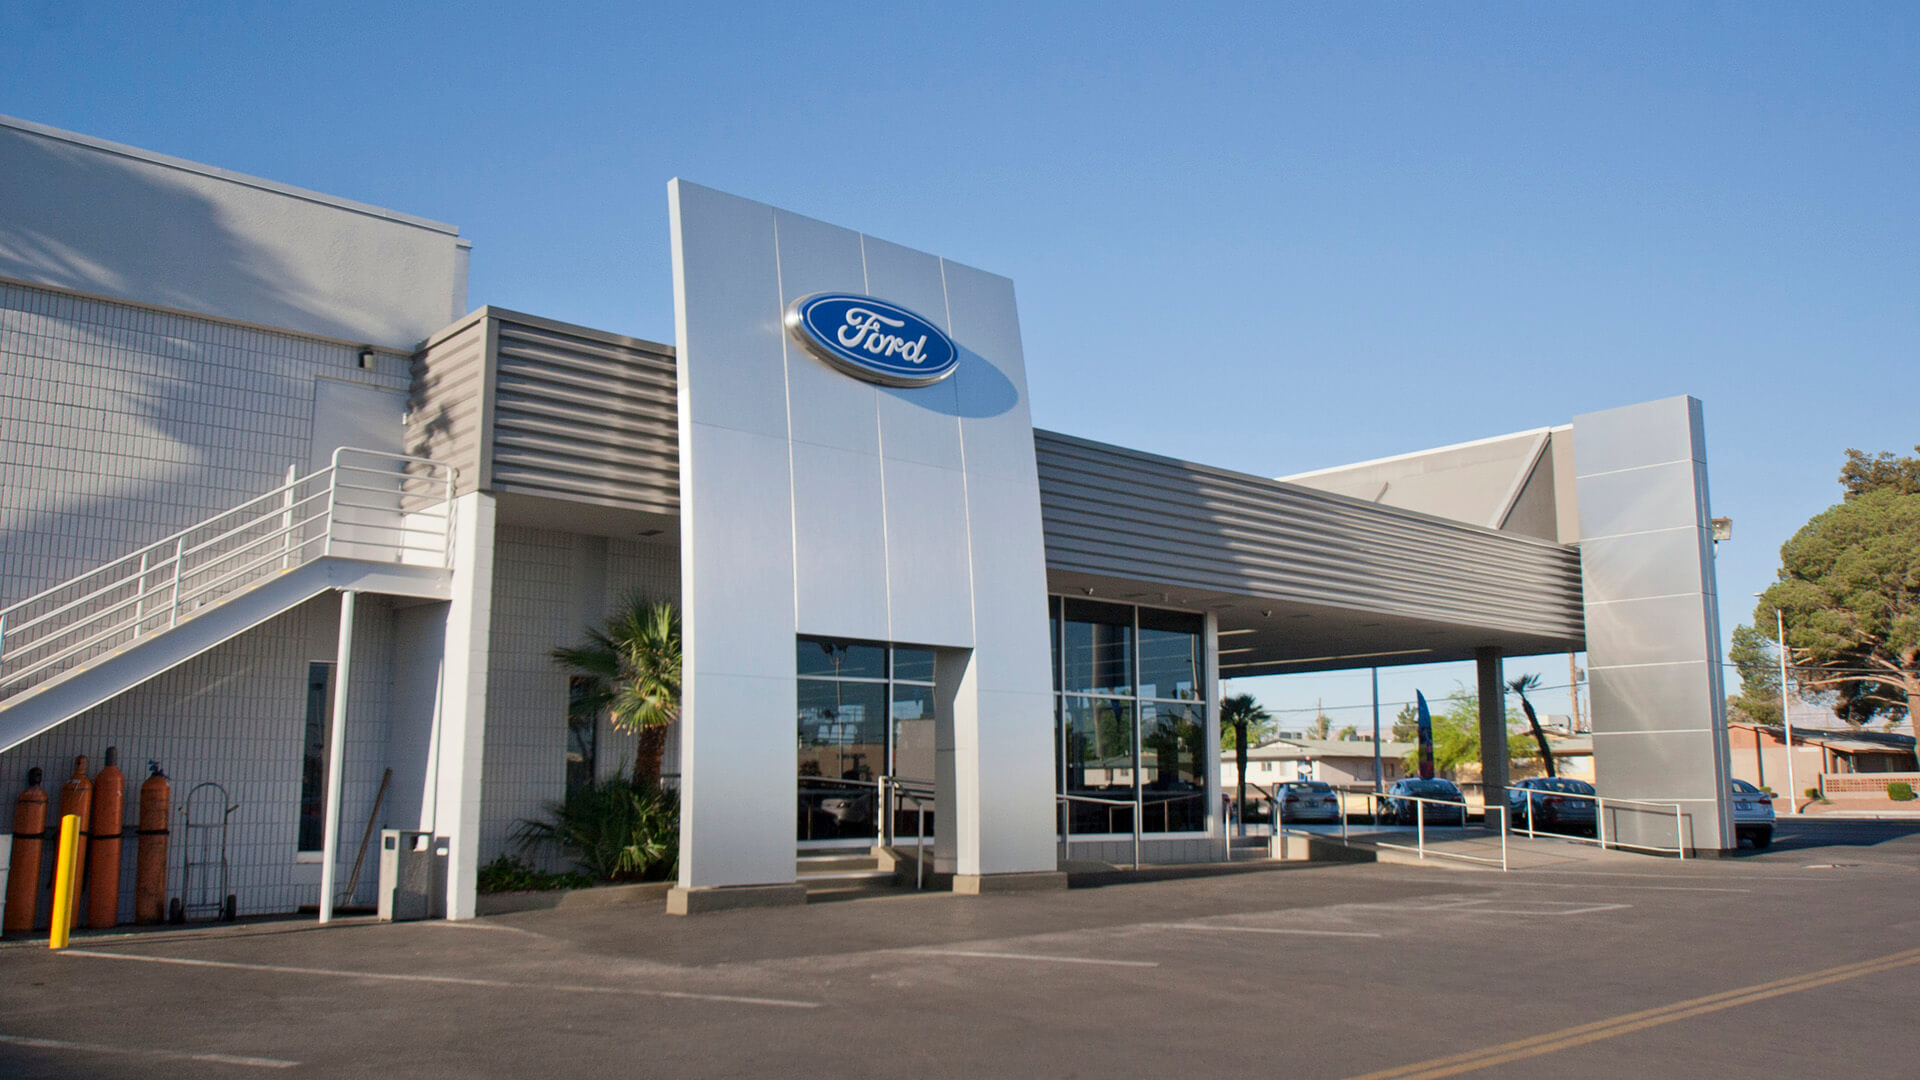 Friendly Ford Dealership exterior photo